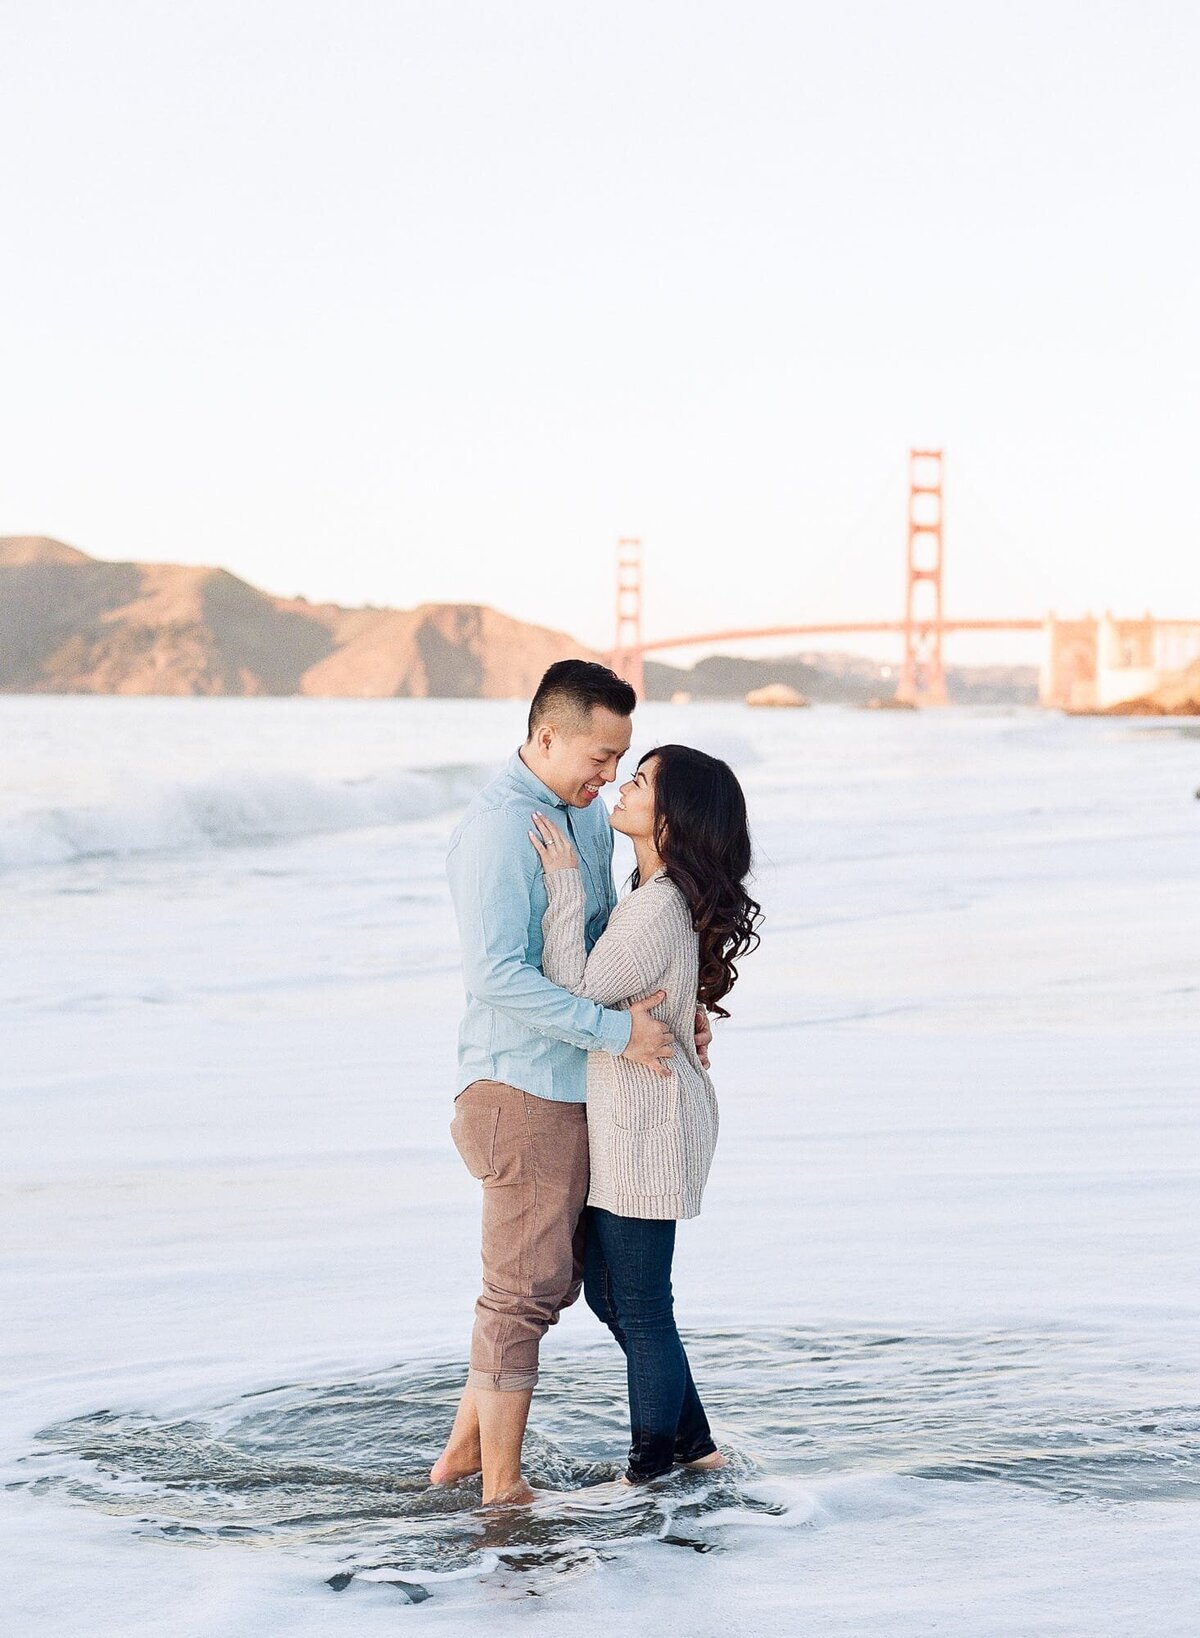 Loving couple look into each others' eyes in ankle-deep water as warm sun hues and the Golden Gate Bridge get blurred in the background.